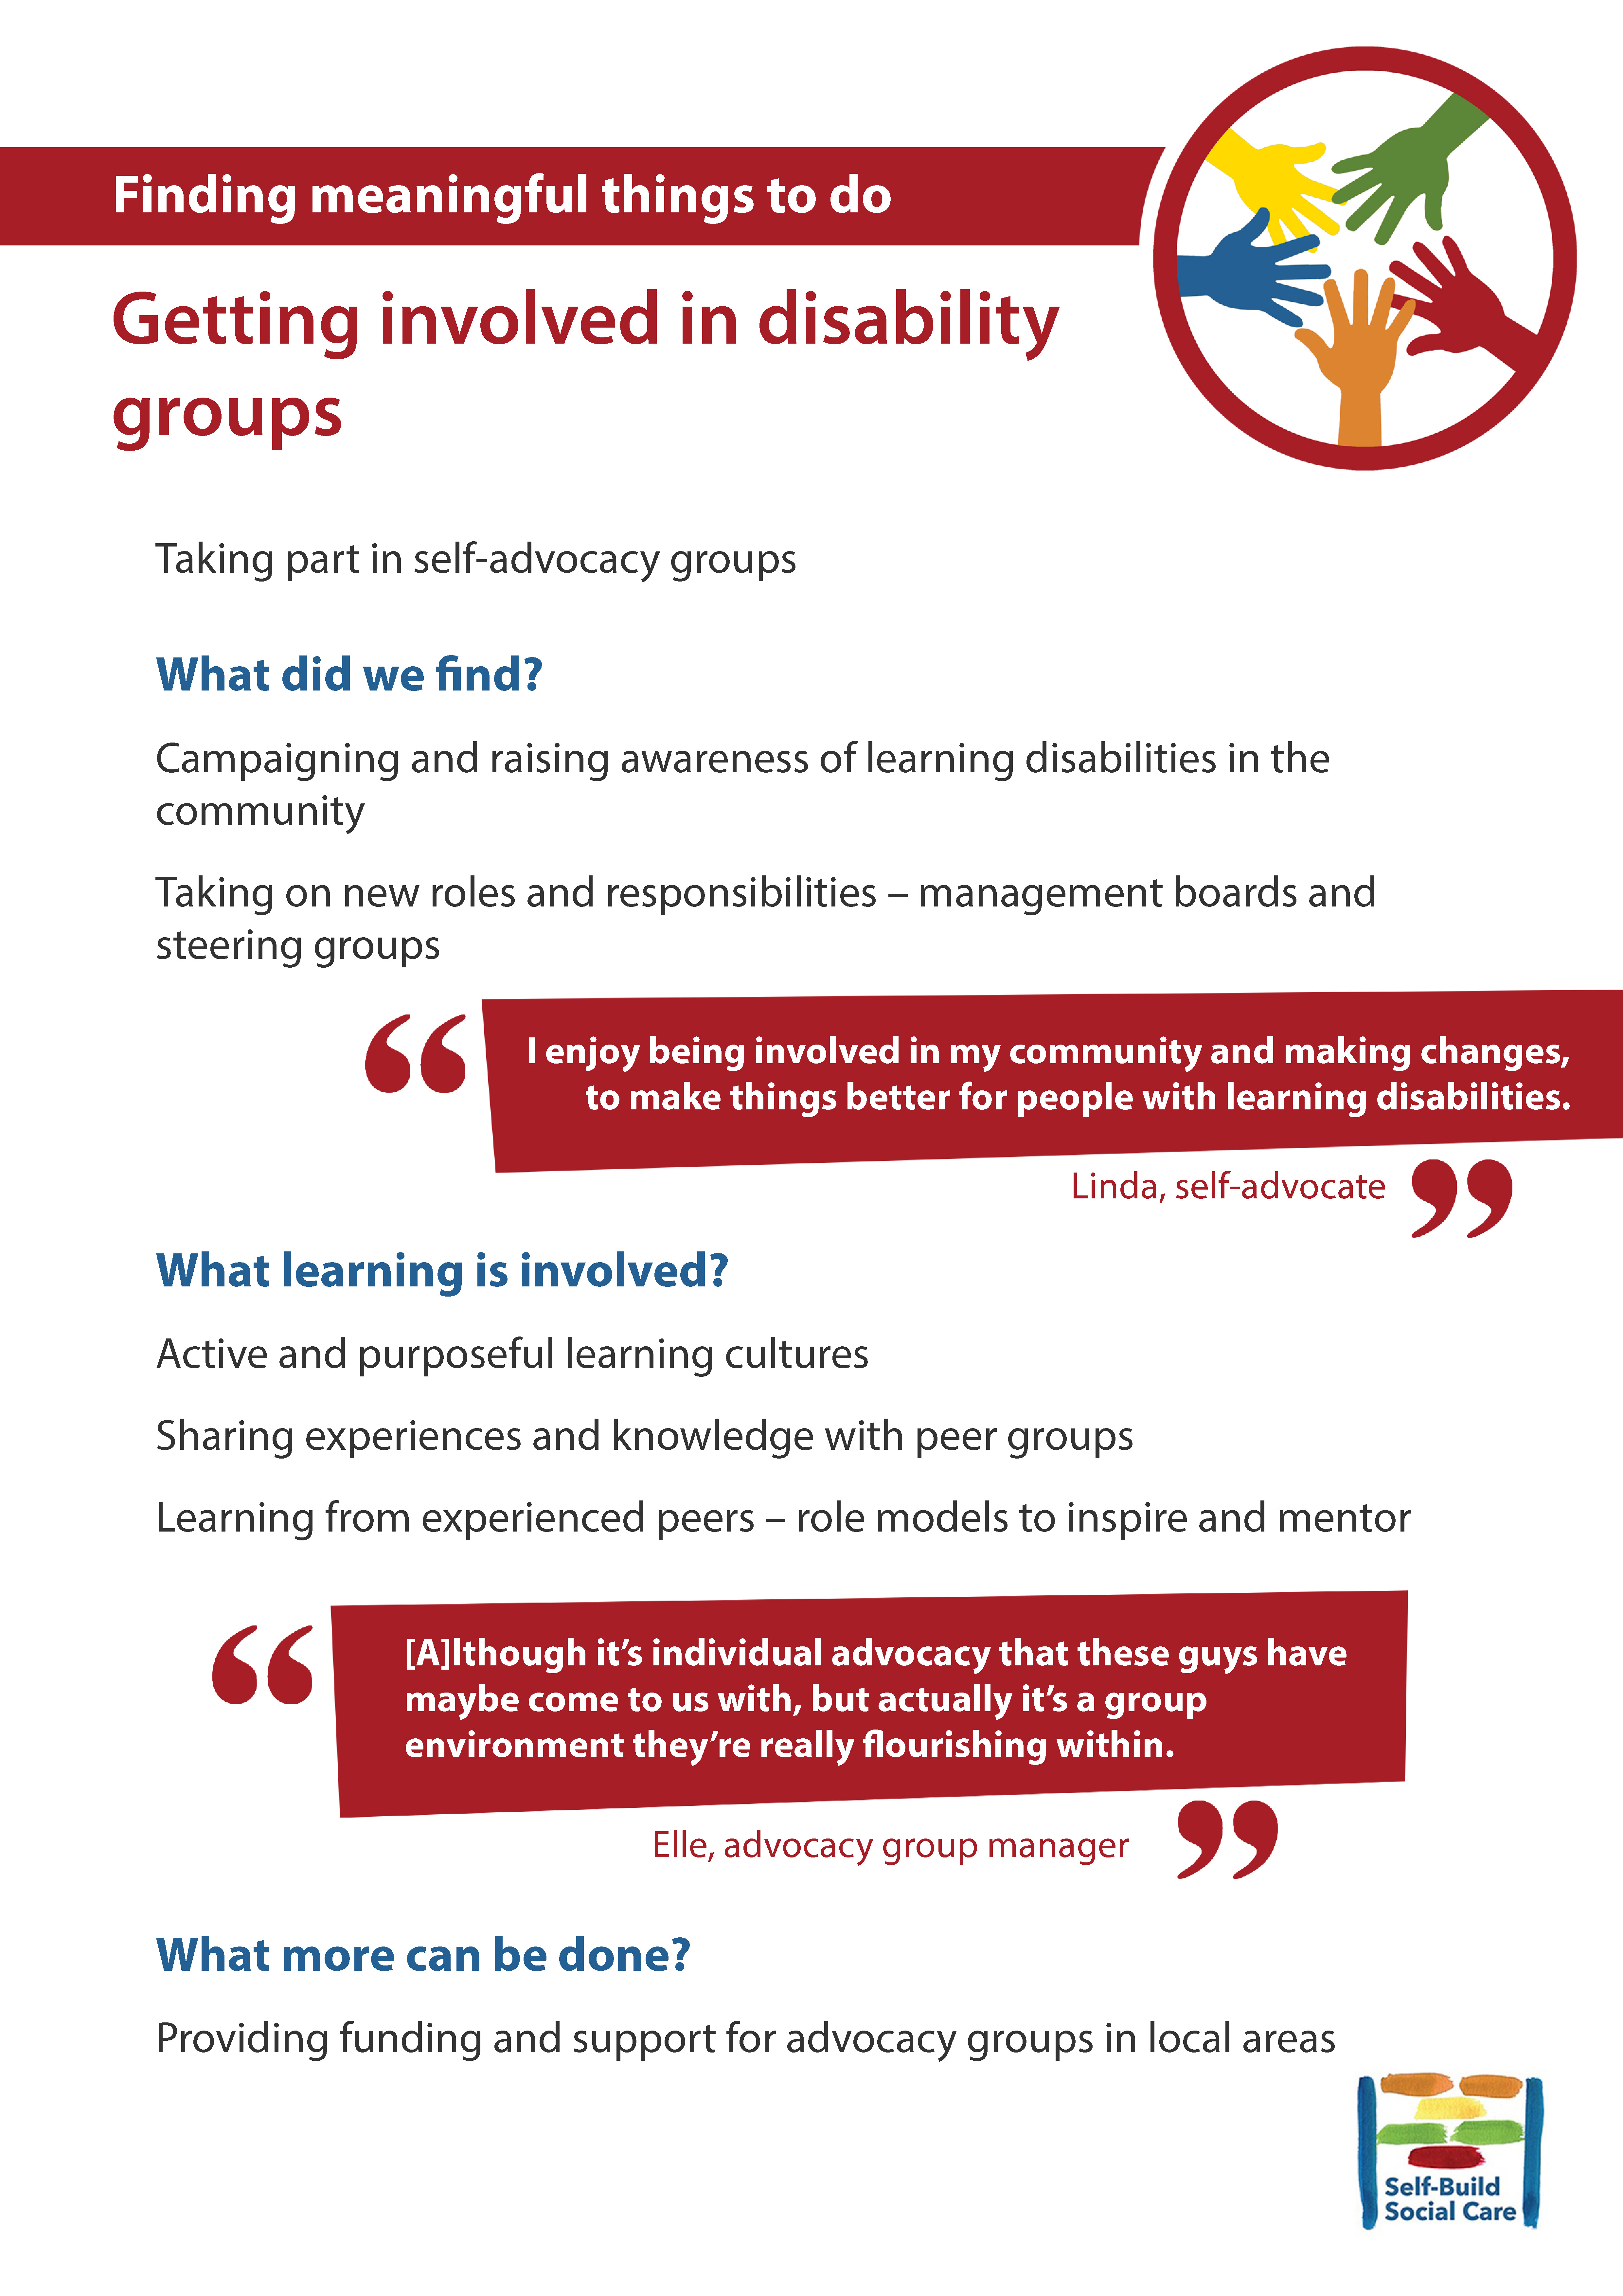 Getting involved in disability groups image